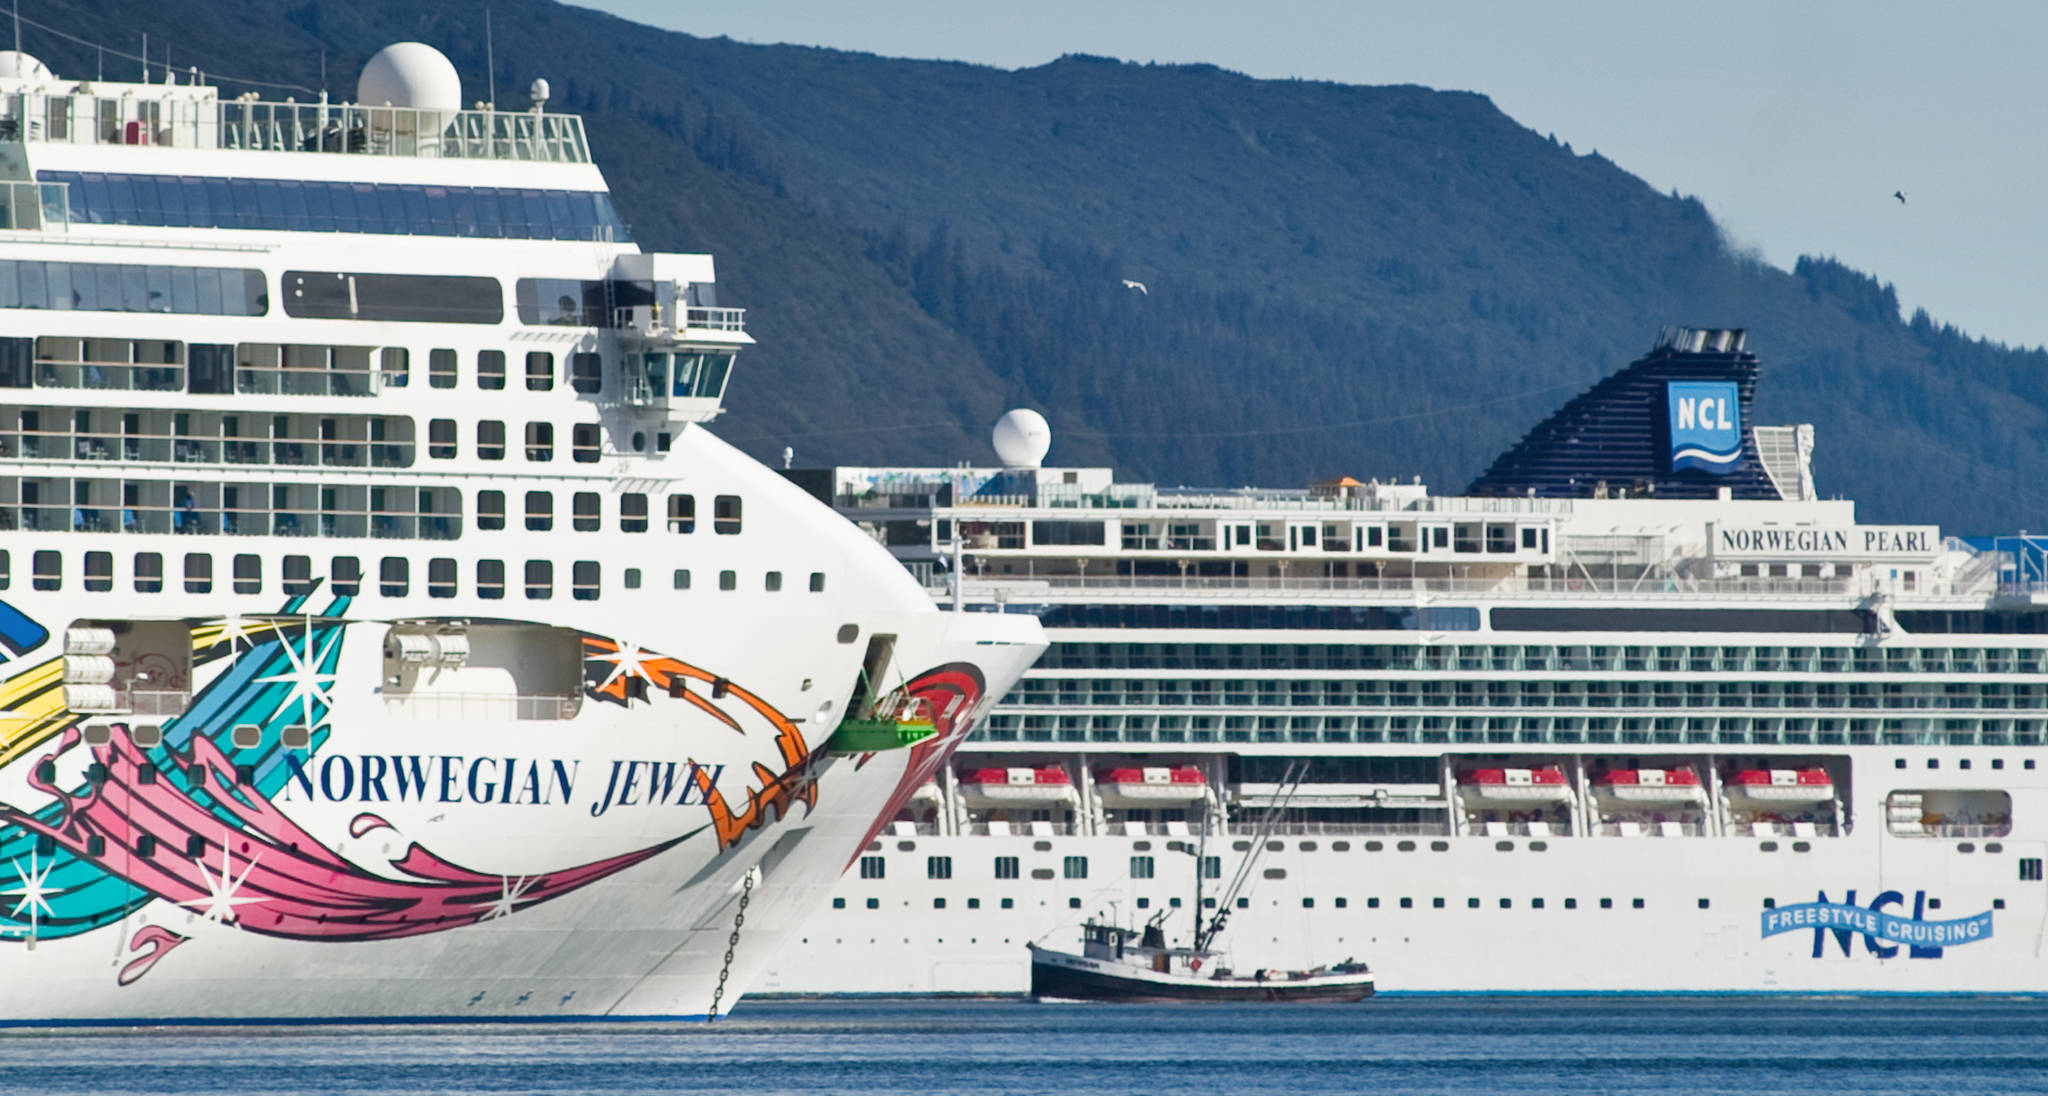 Michael Penn / Juneau Empire File
A fishing vessel is drawfed by the Norwegian Cruise Lines’ Norwegian Jewel and Norwegian Pearl in Juneau’s downtown harbor in September 2014. On Thursday, Canada announced a ban on cruise vessels in Canadian waters through February 2022.